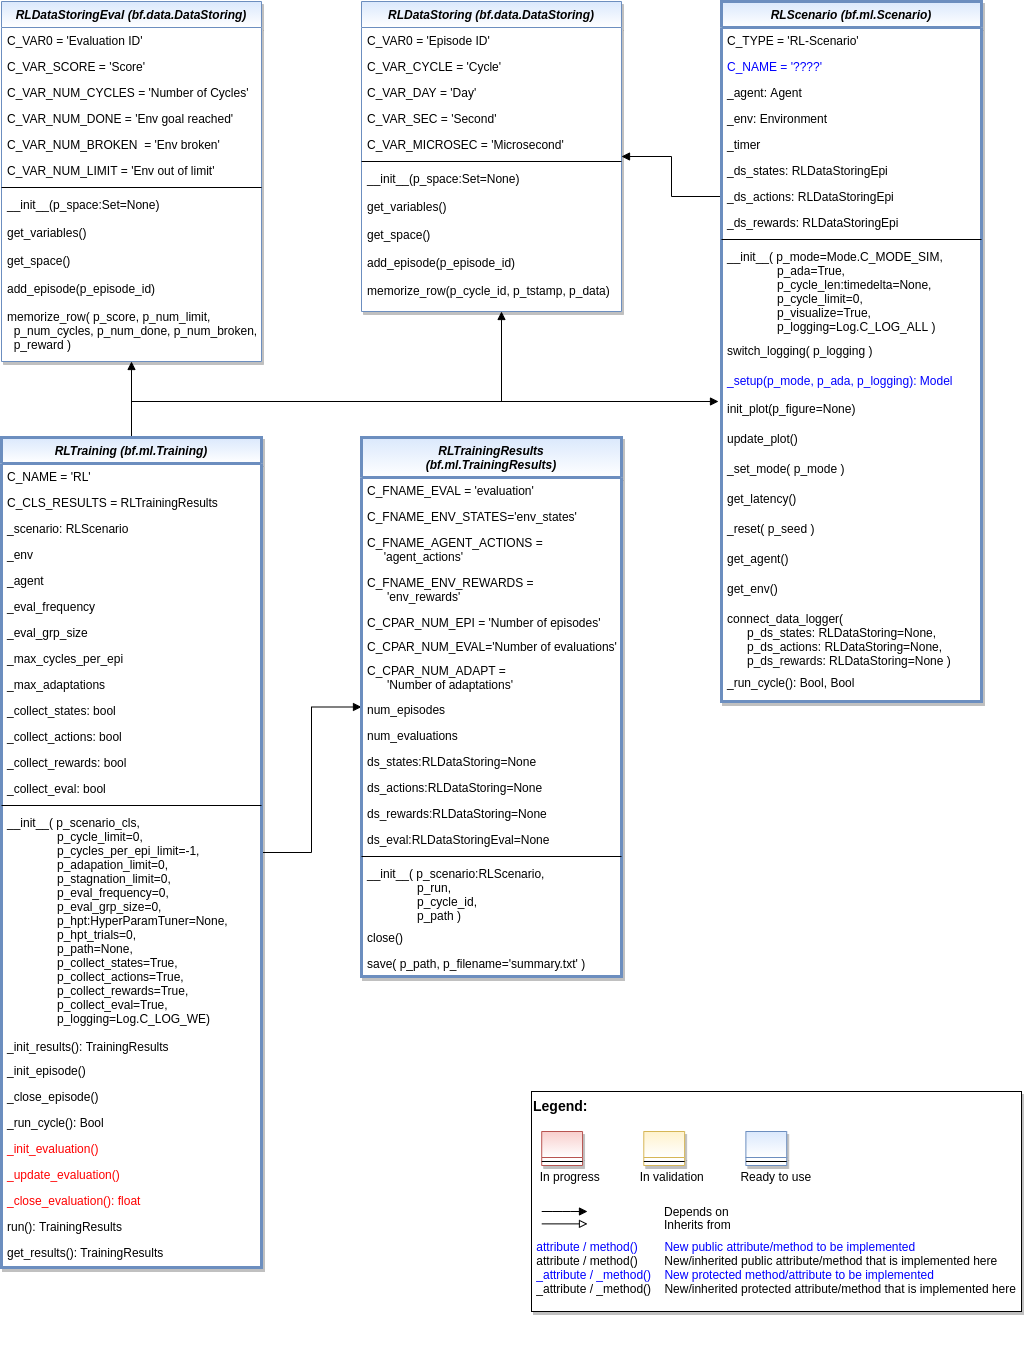 ../../../_images/MLPro-RL-Train_class_diagram.png